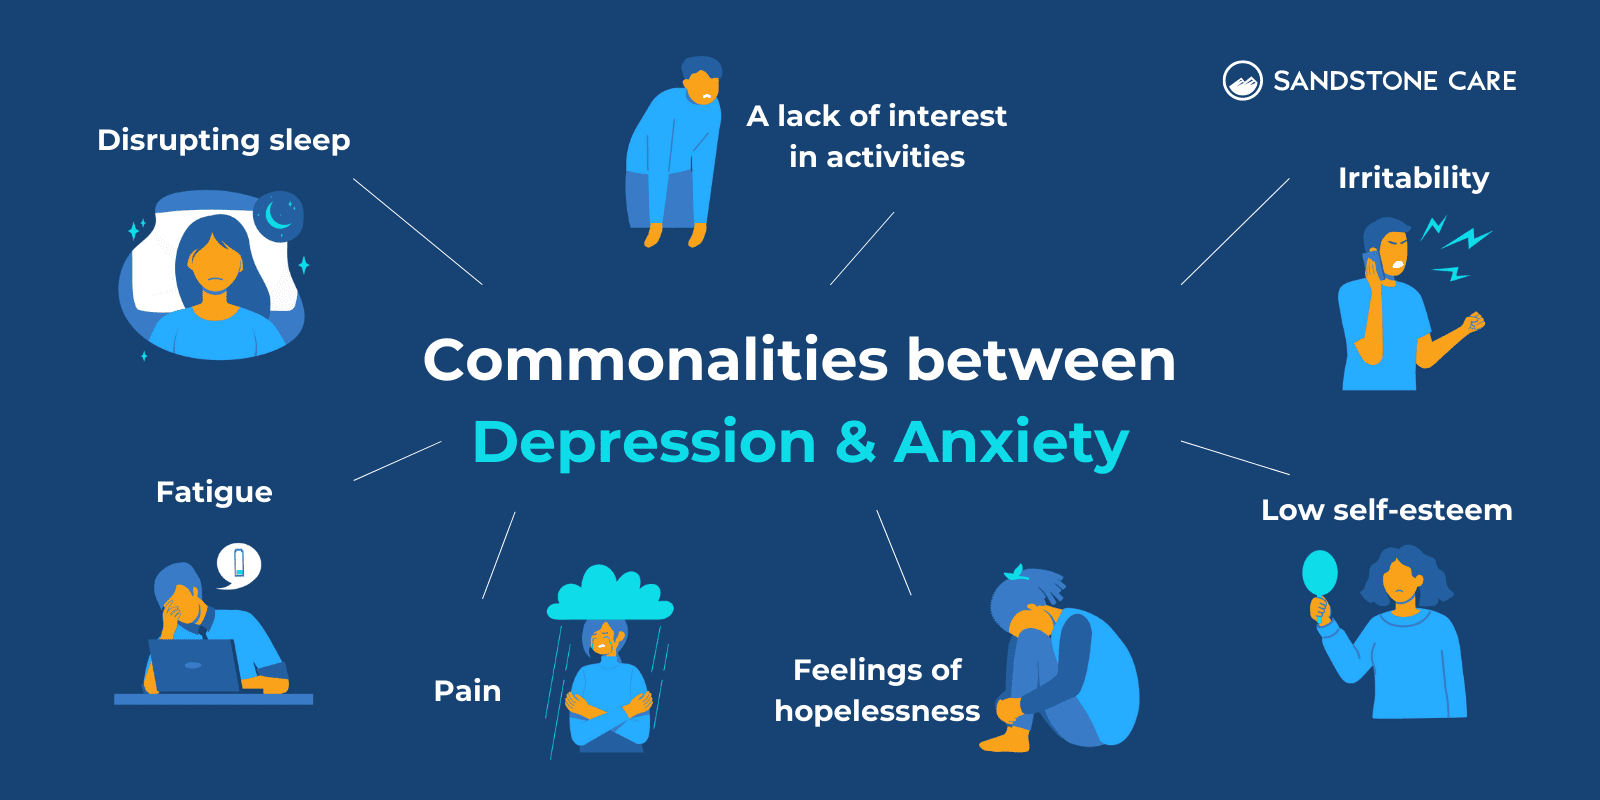 "Commonalities between depression & Anxiety" text written in the center of the infographic surrounded by commonalities represented with relevant illustrations